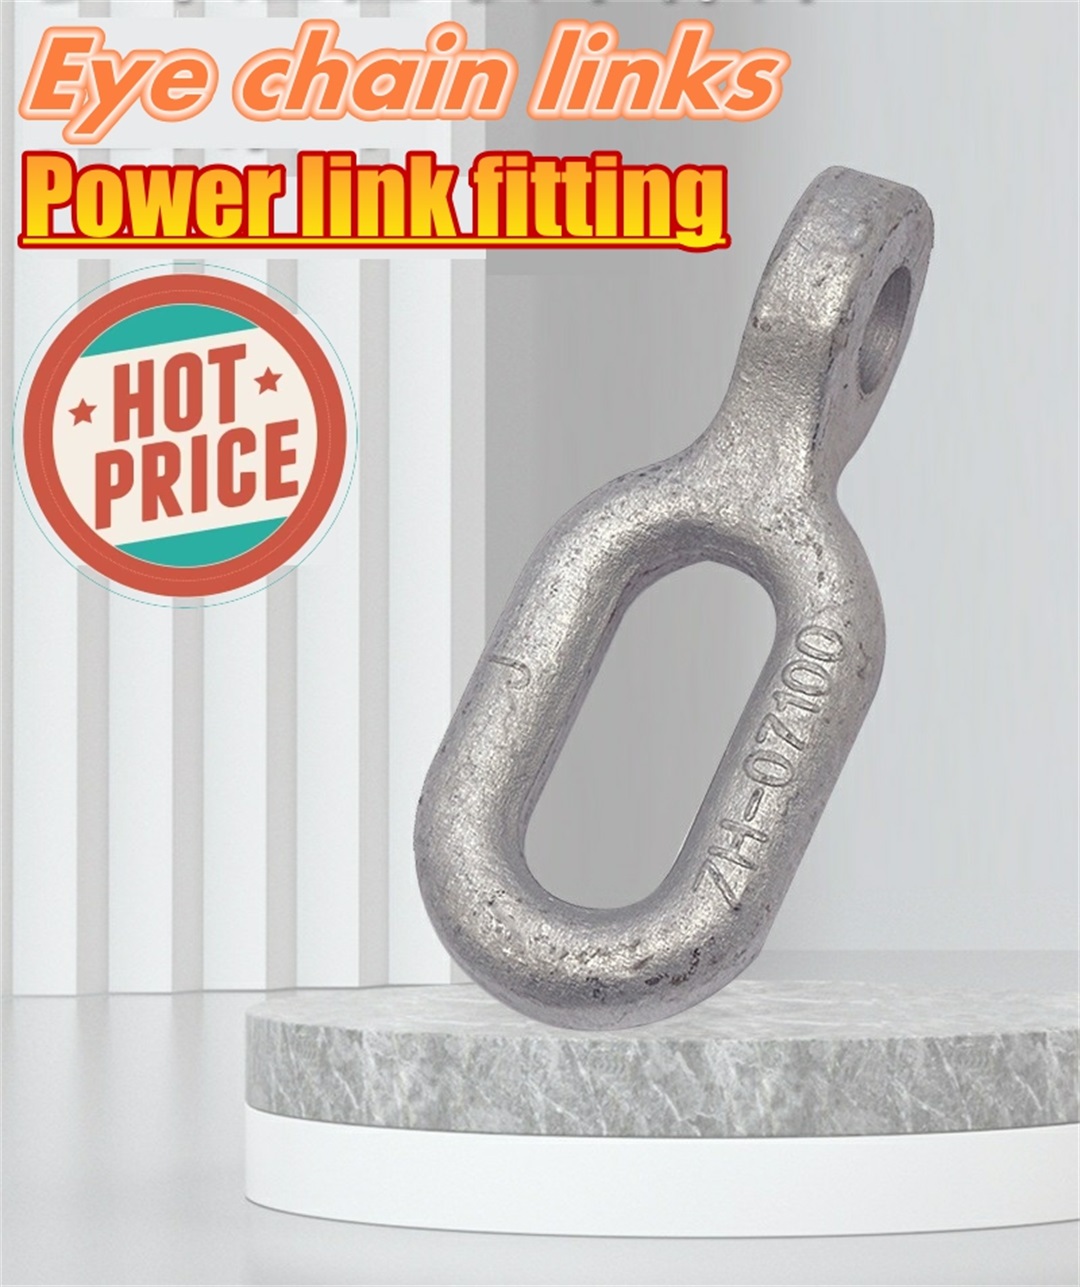 Right angle hanging ring Eye chain links  Power link fitting